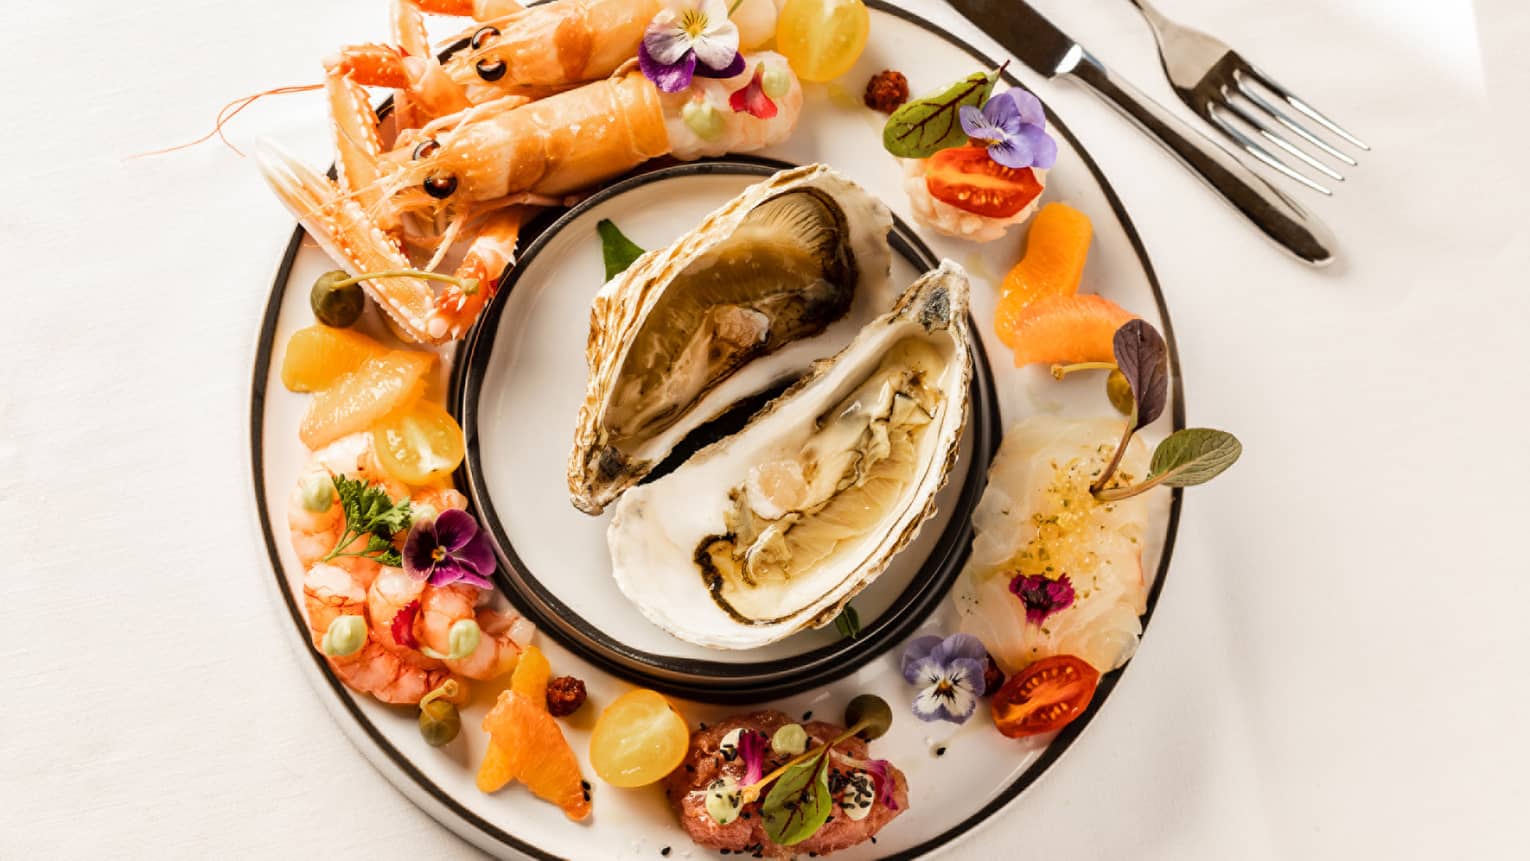 Selection of raw fish and shellfish on round plate with two in-shell raw oysters in centre